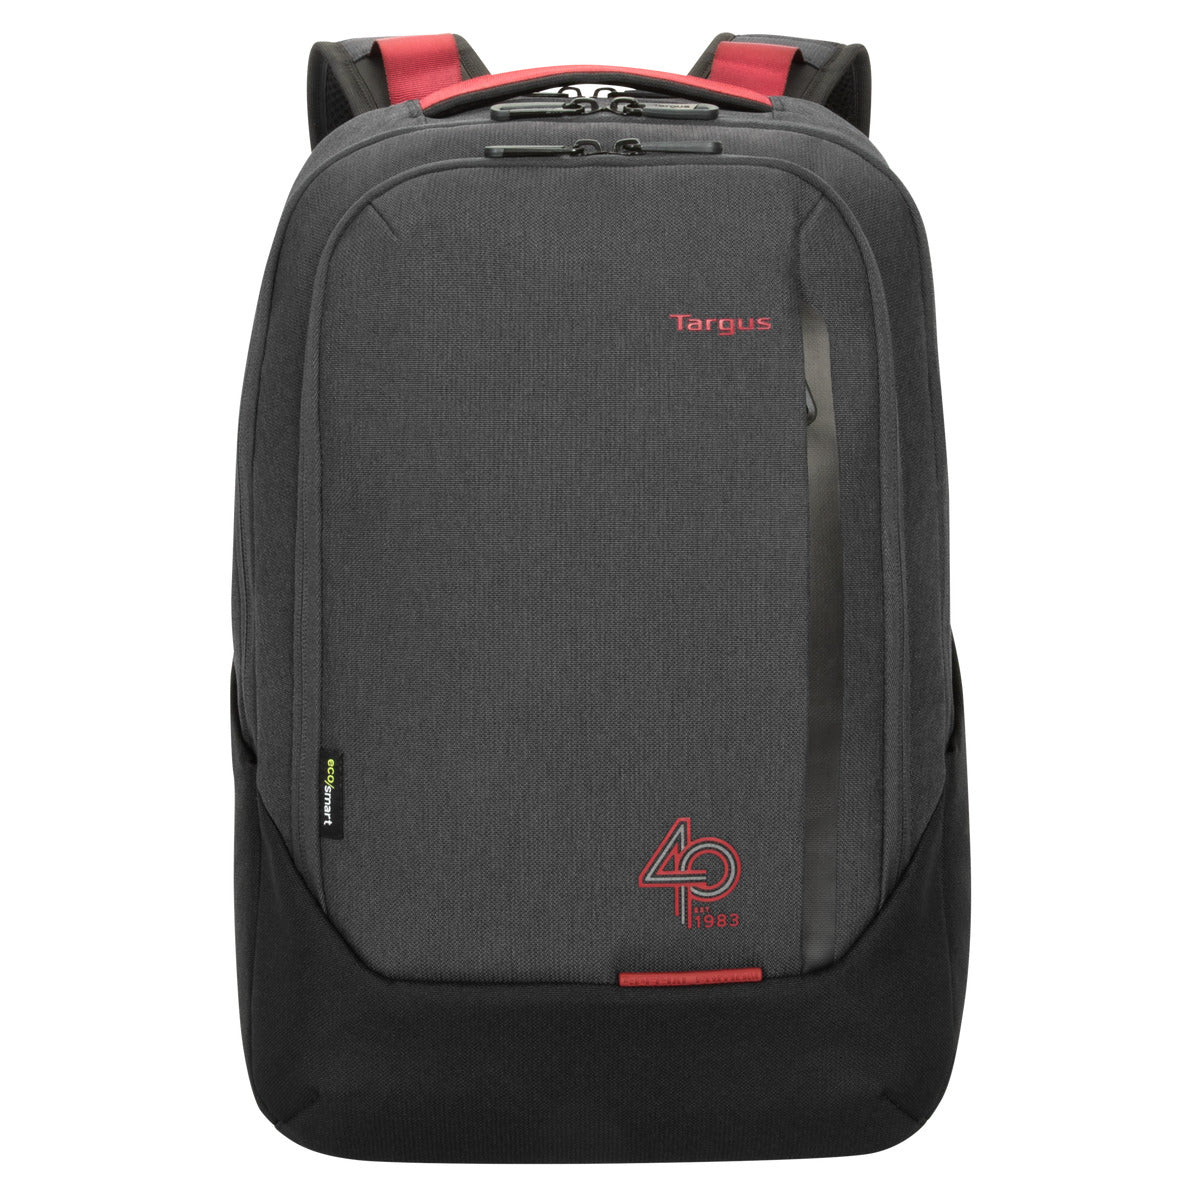 40th Anniversary Laptop Bags